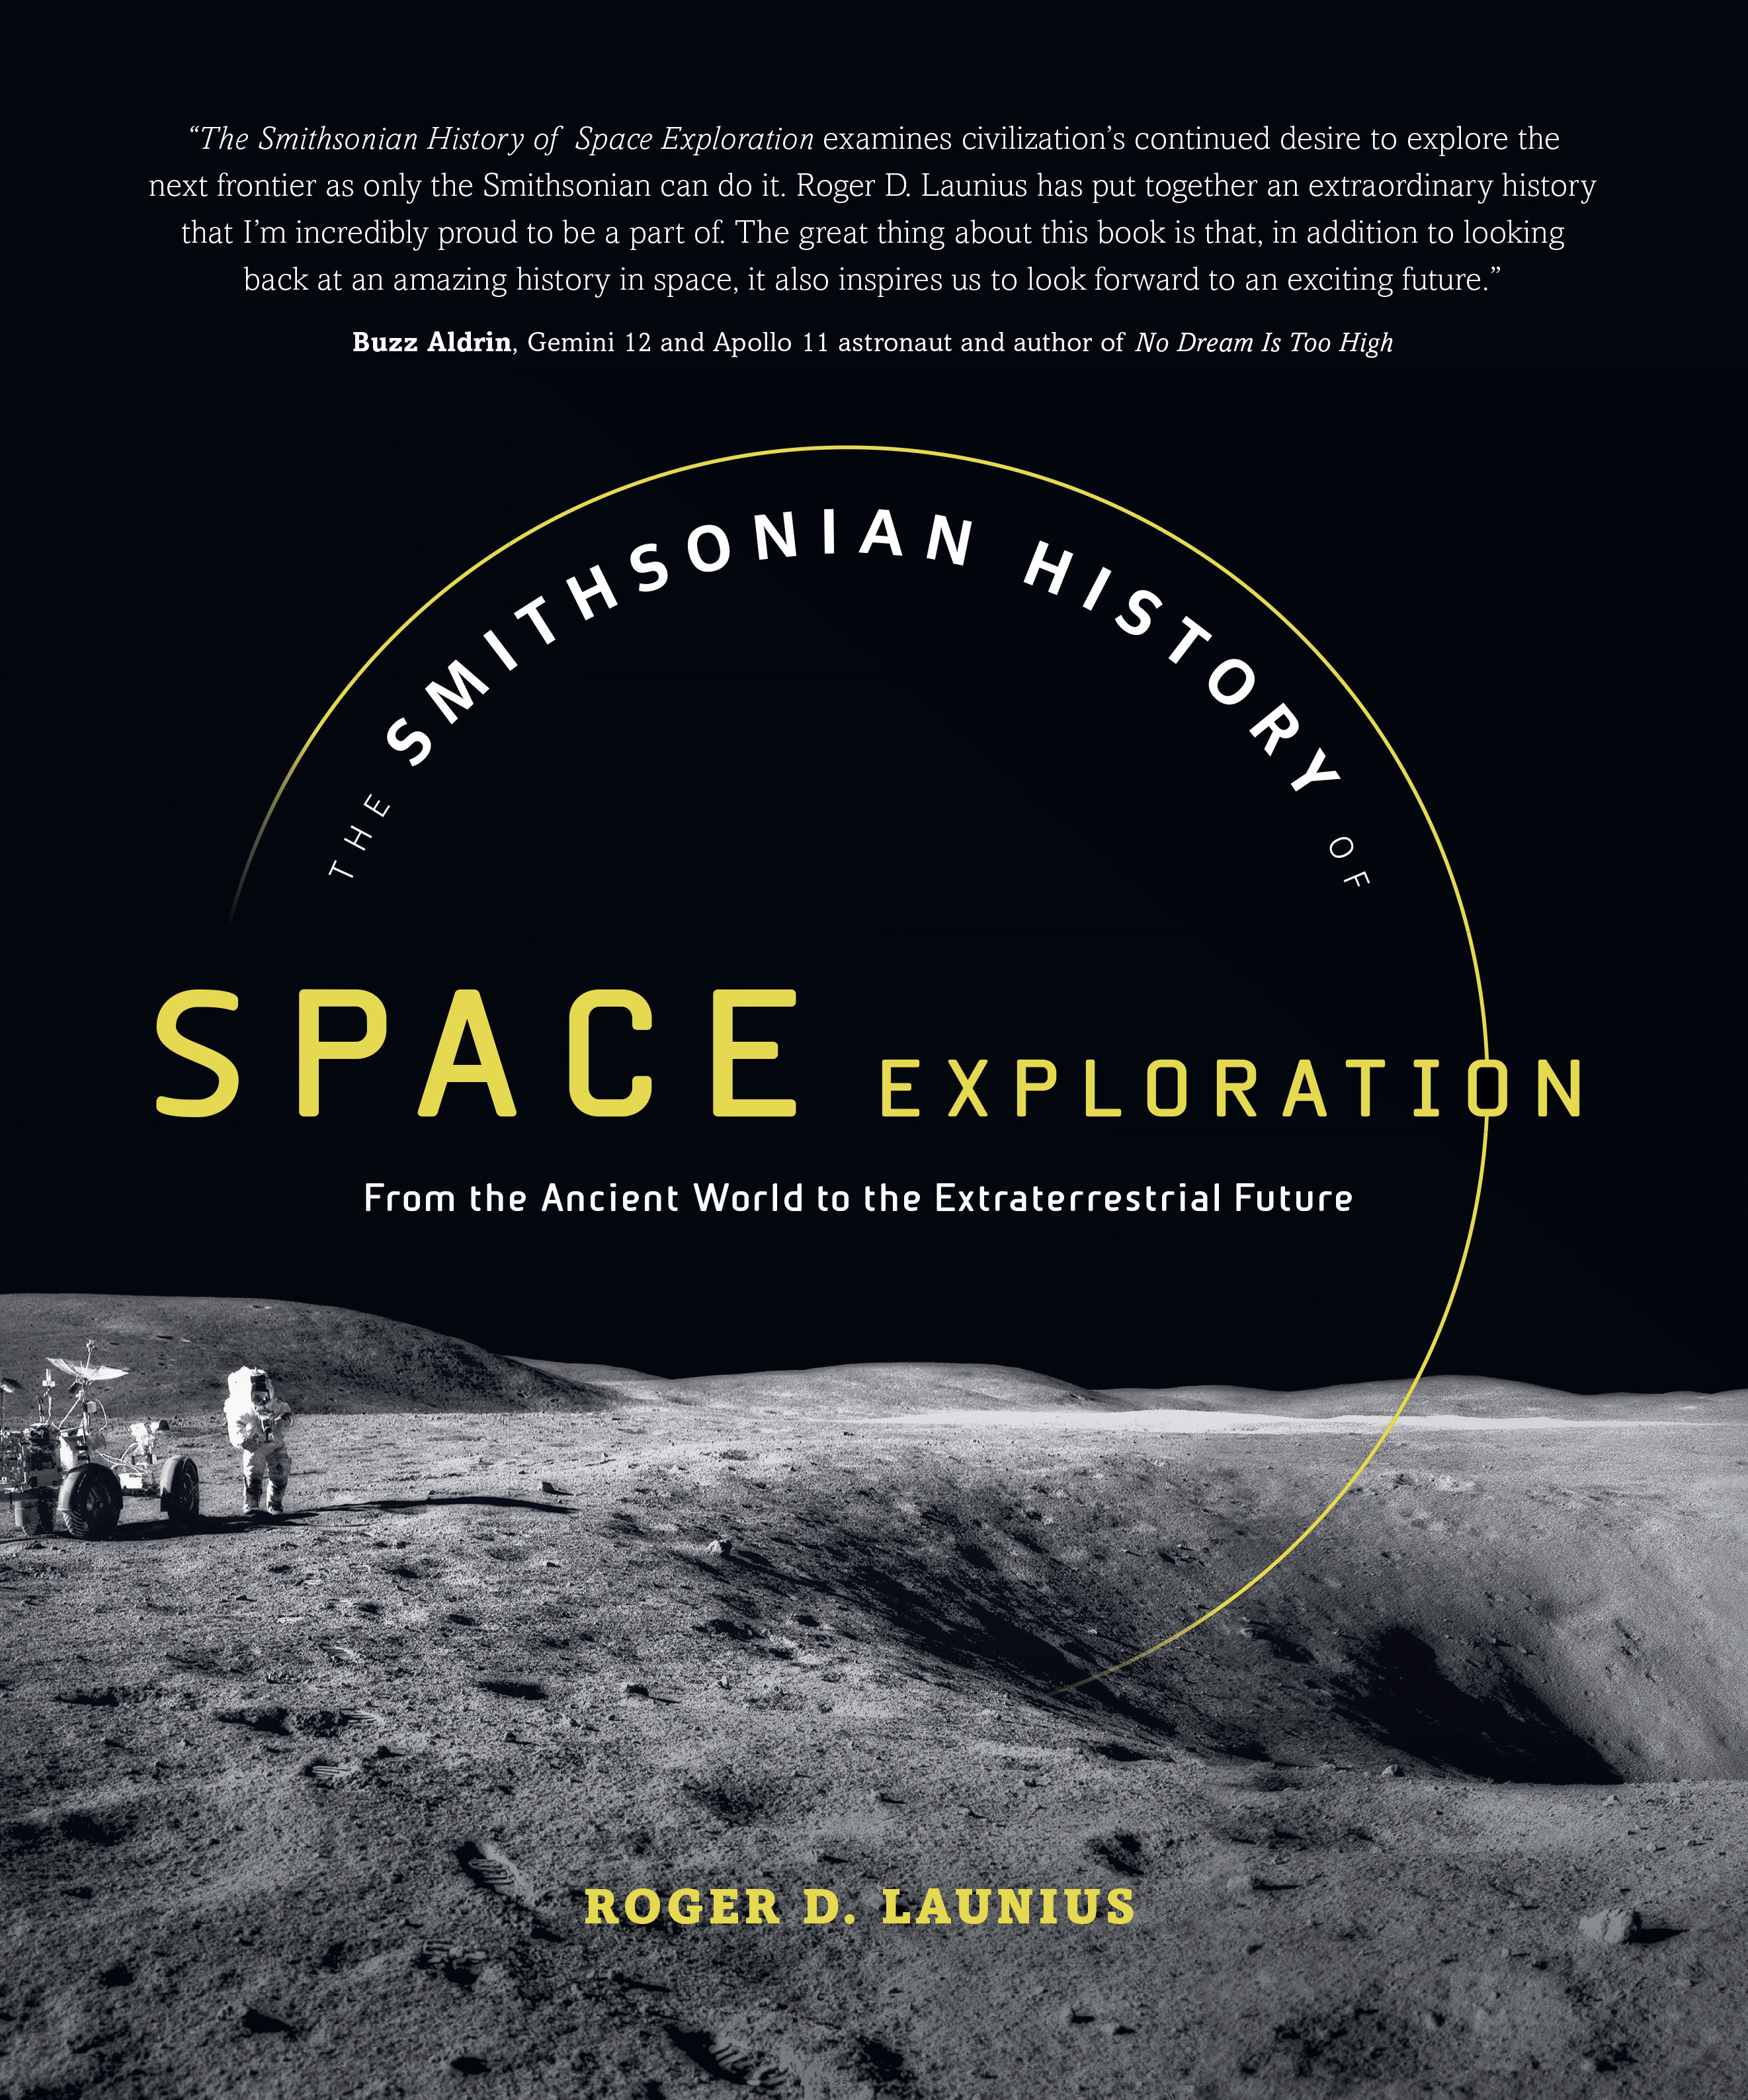 The Smithsonian History Of Space Exploration (Hardcover Book)